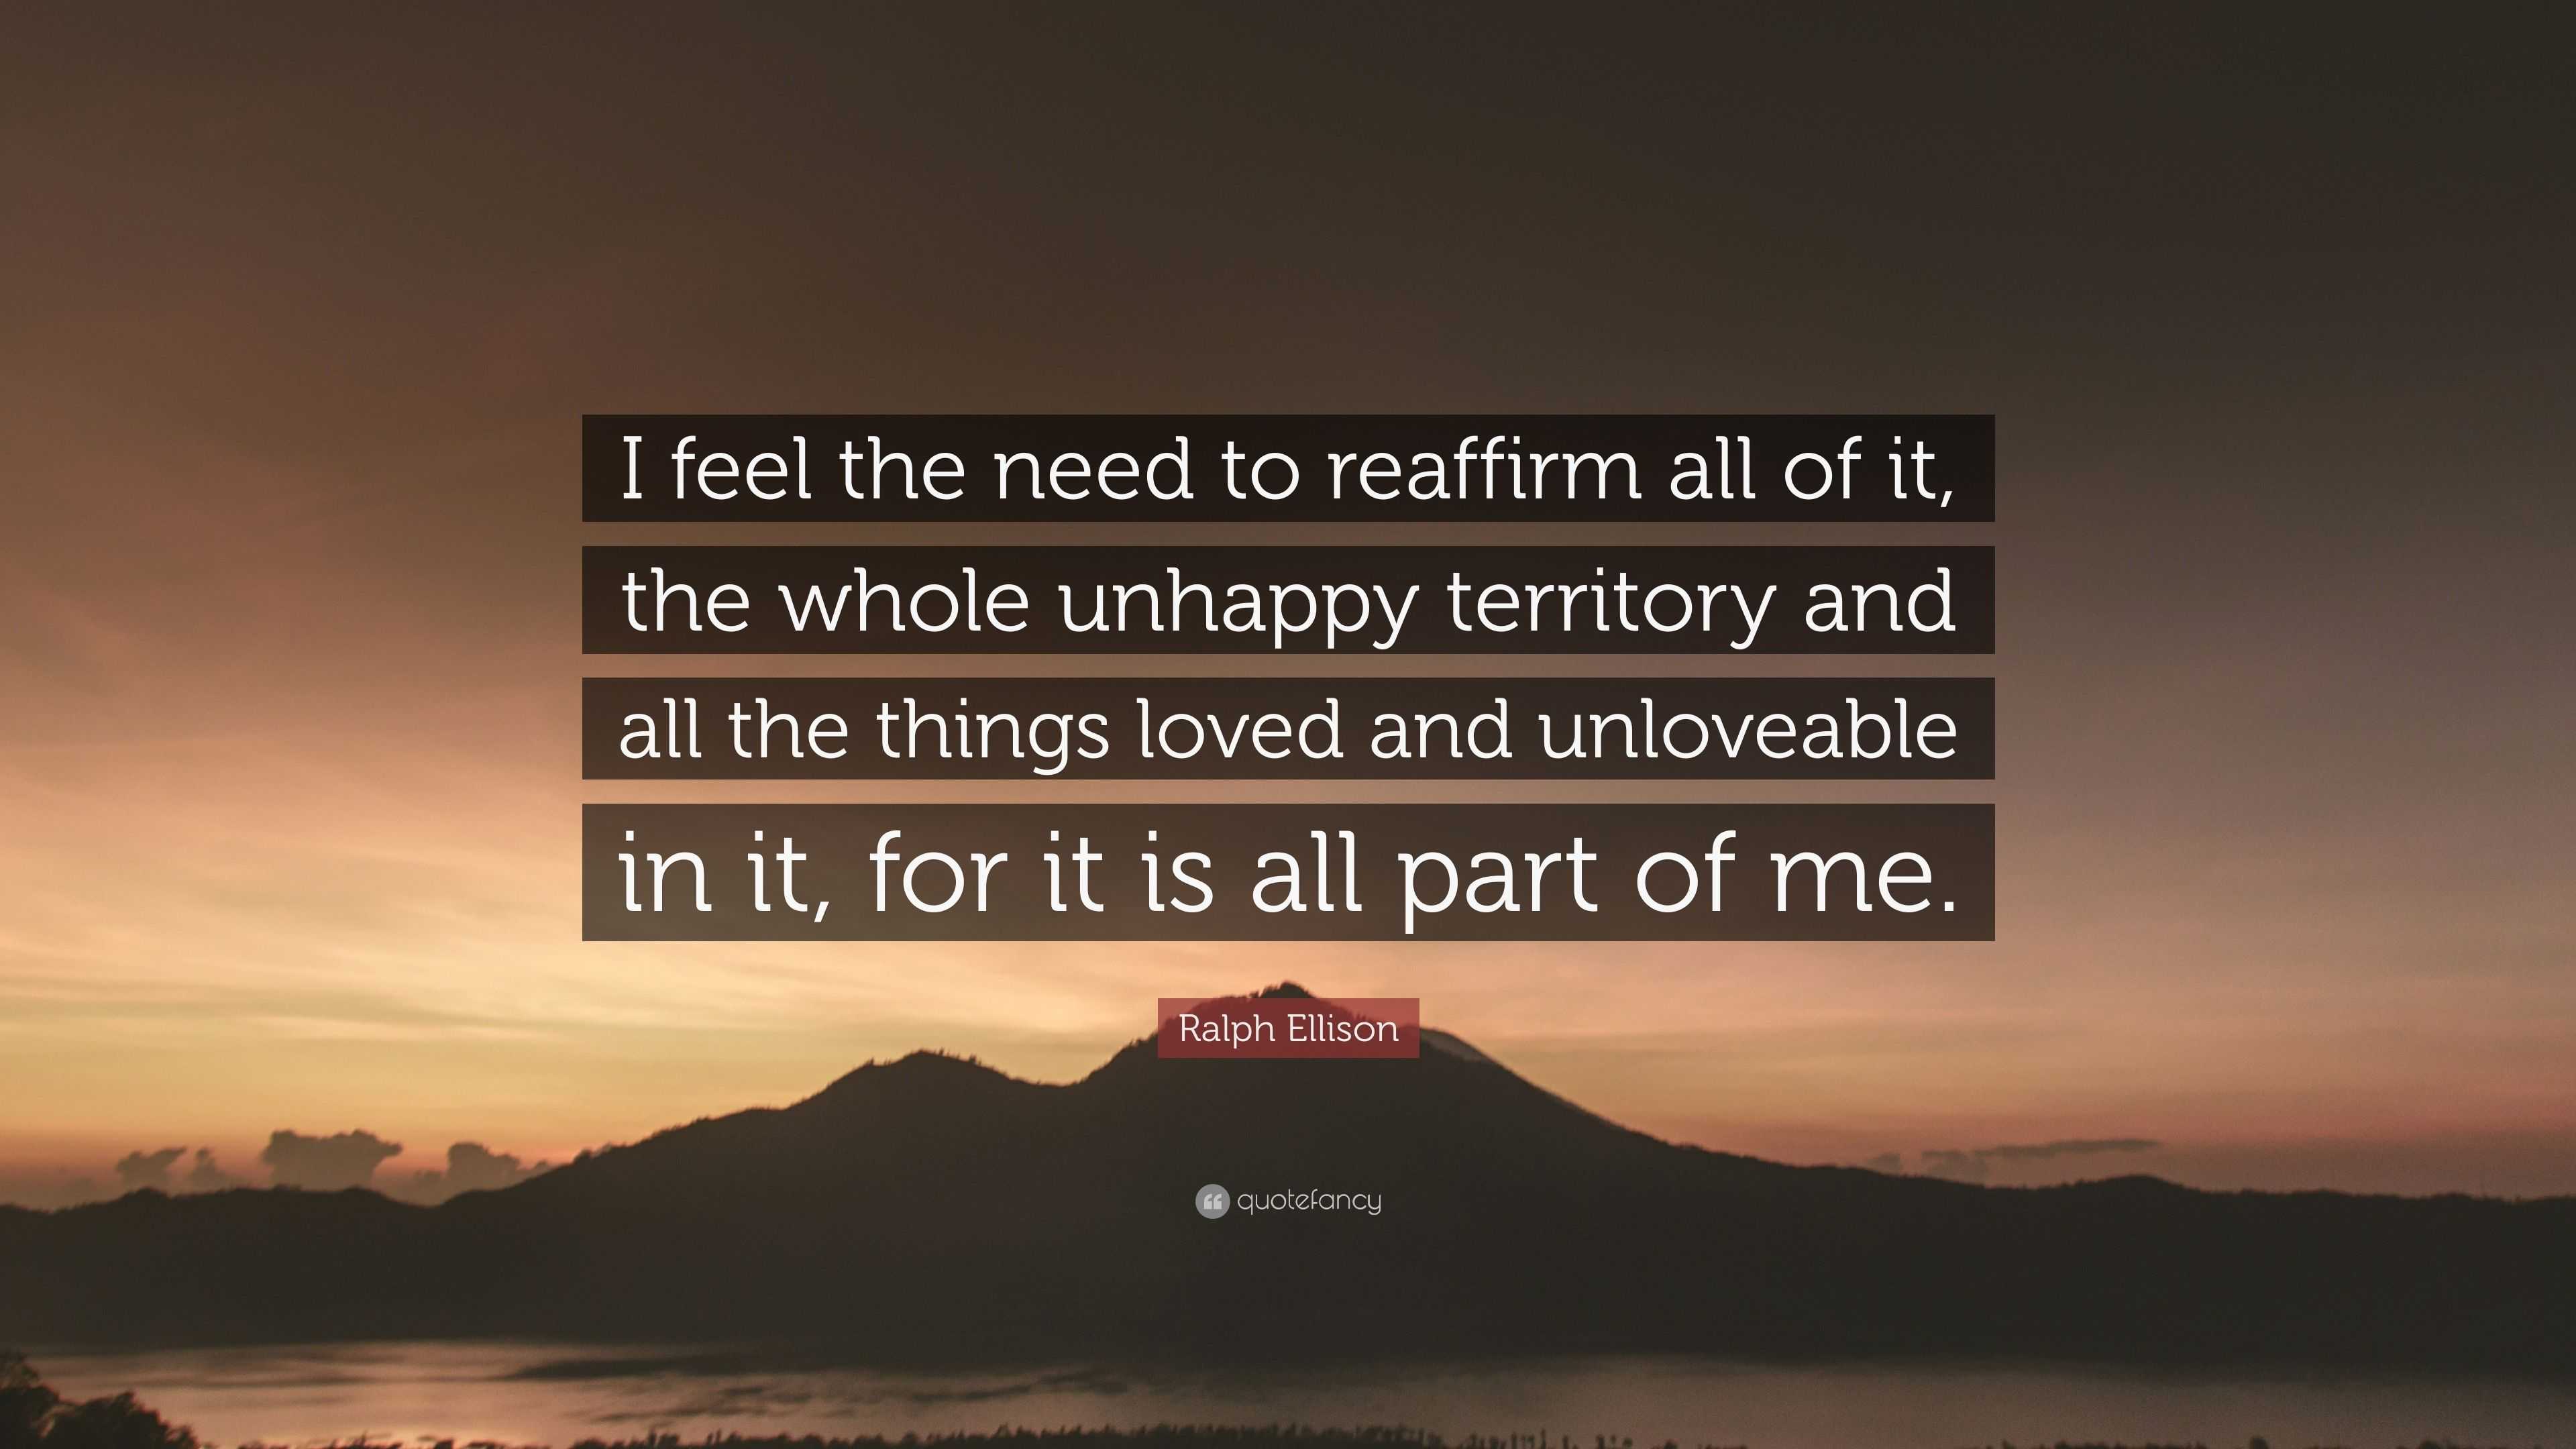 Ralph Ellison Quote: “I feel the need to reaffirm all of it, the whole ...